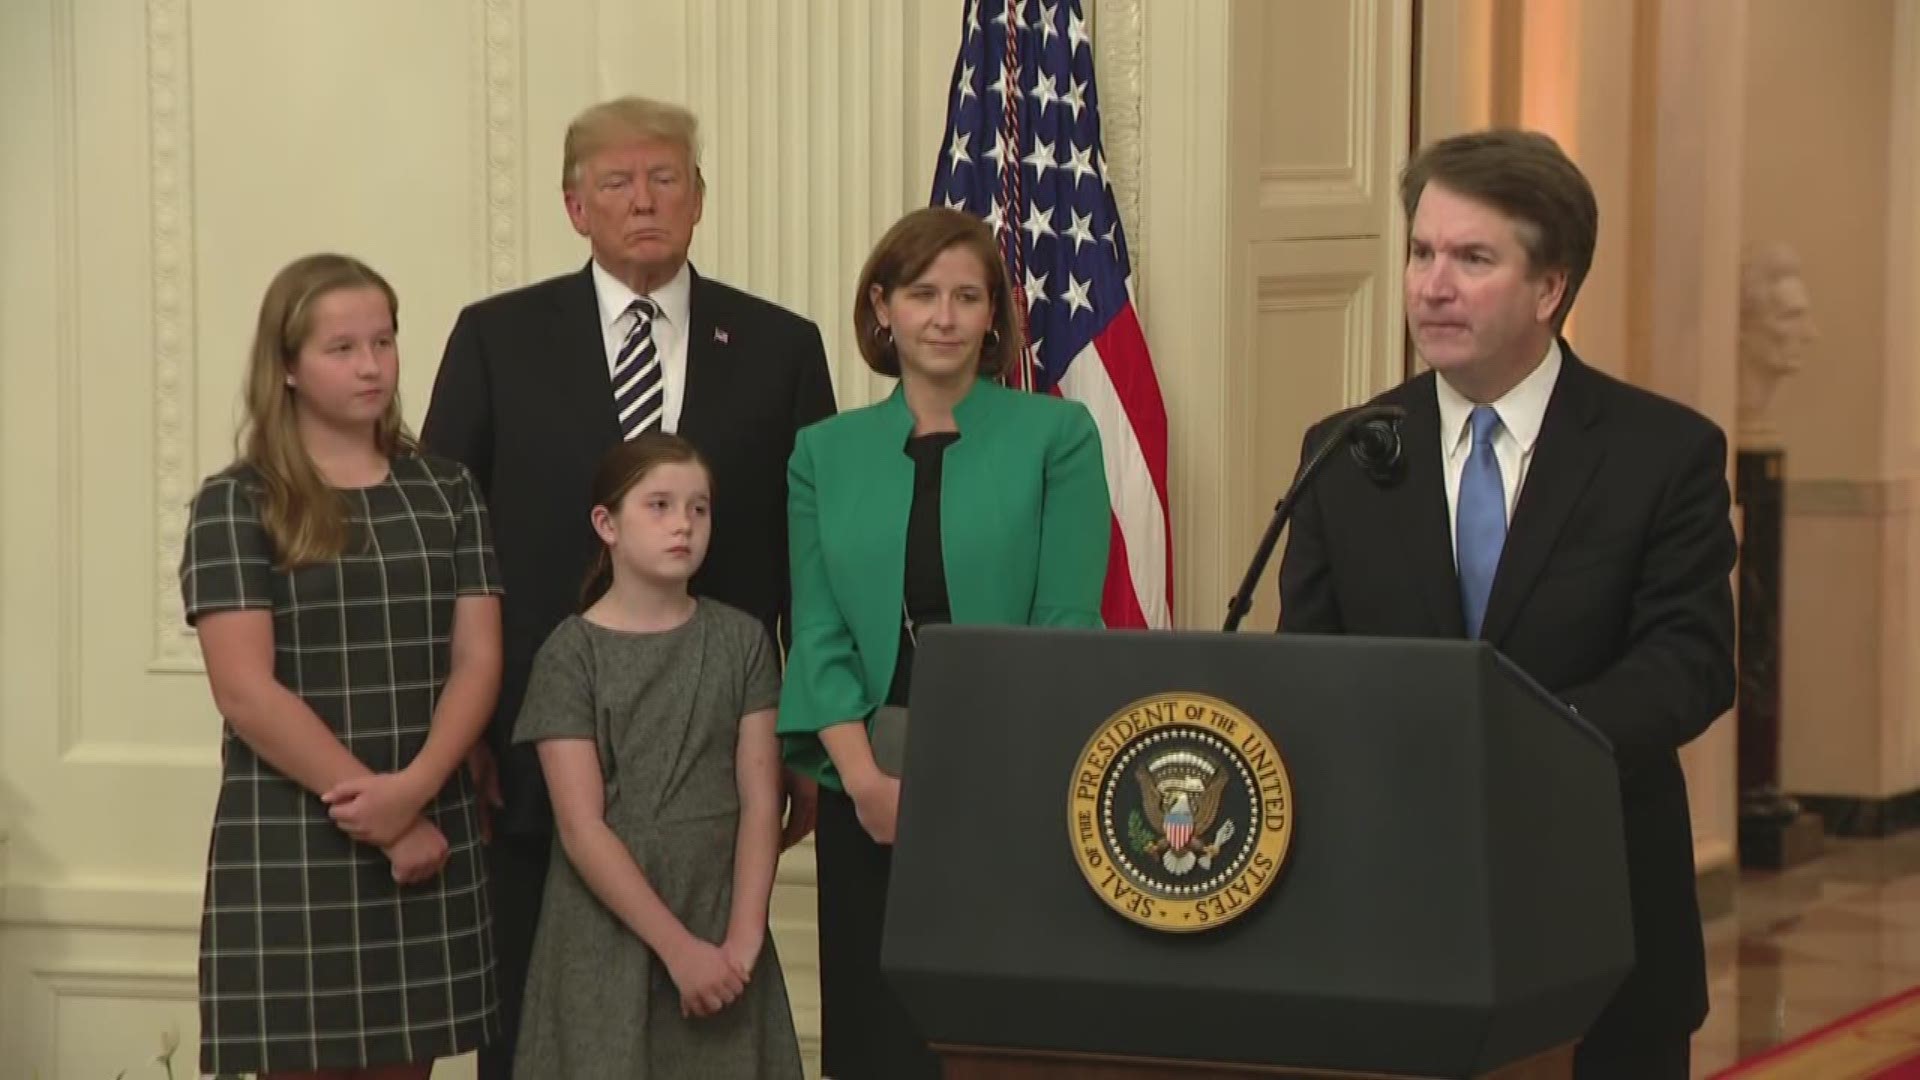 Kavanaugh already has been at the Supreme Court preparing for his first day on the bench Tuesday.